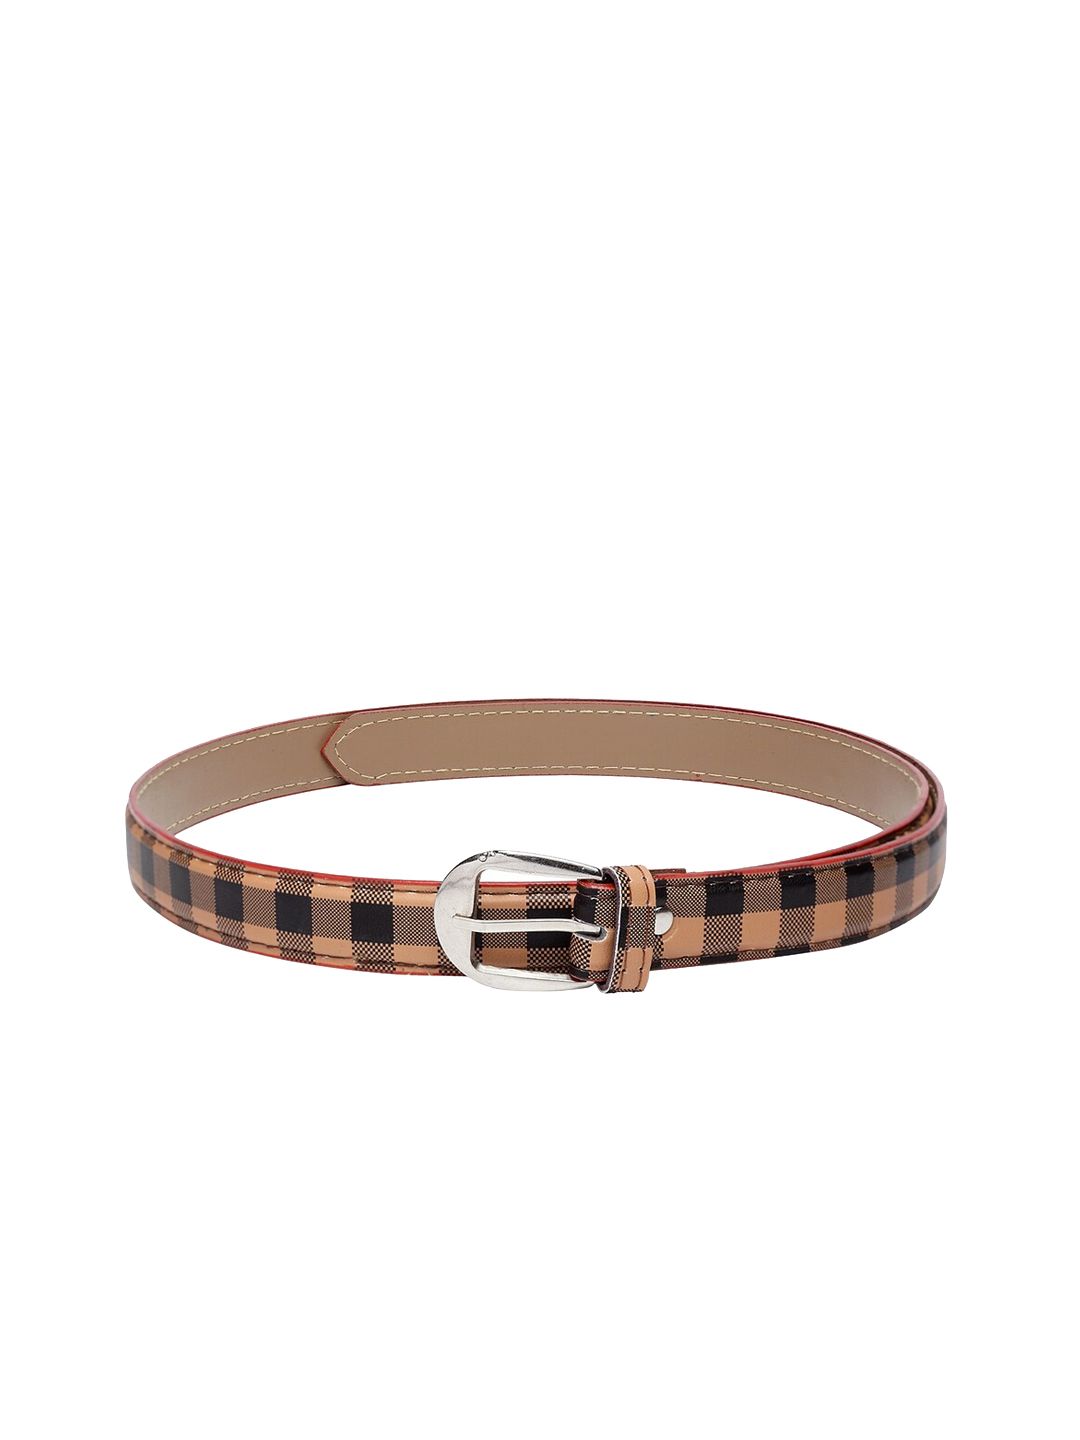 Apsis Women Brown & Black Checked Belt Price in India